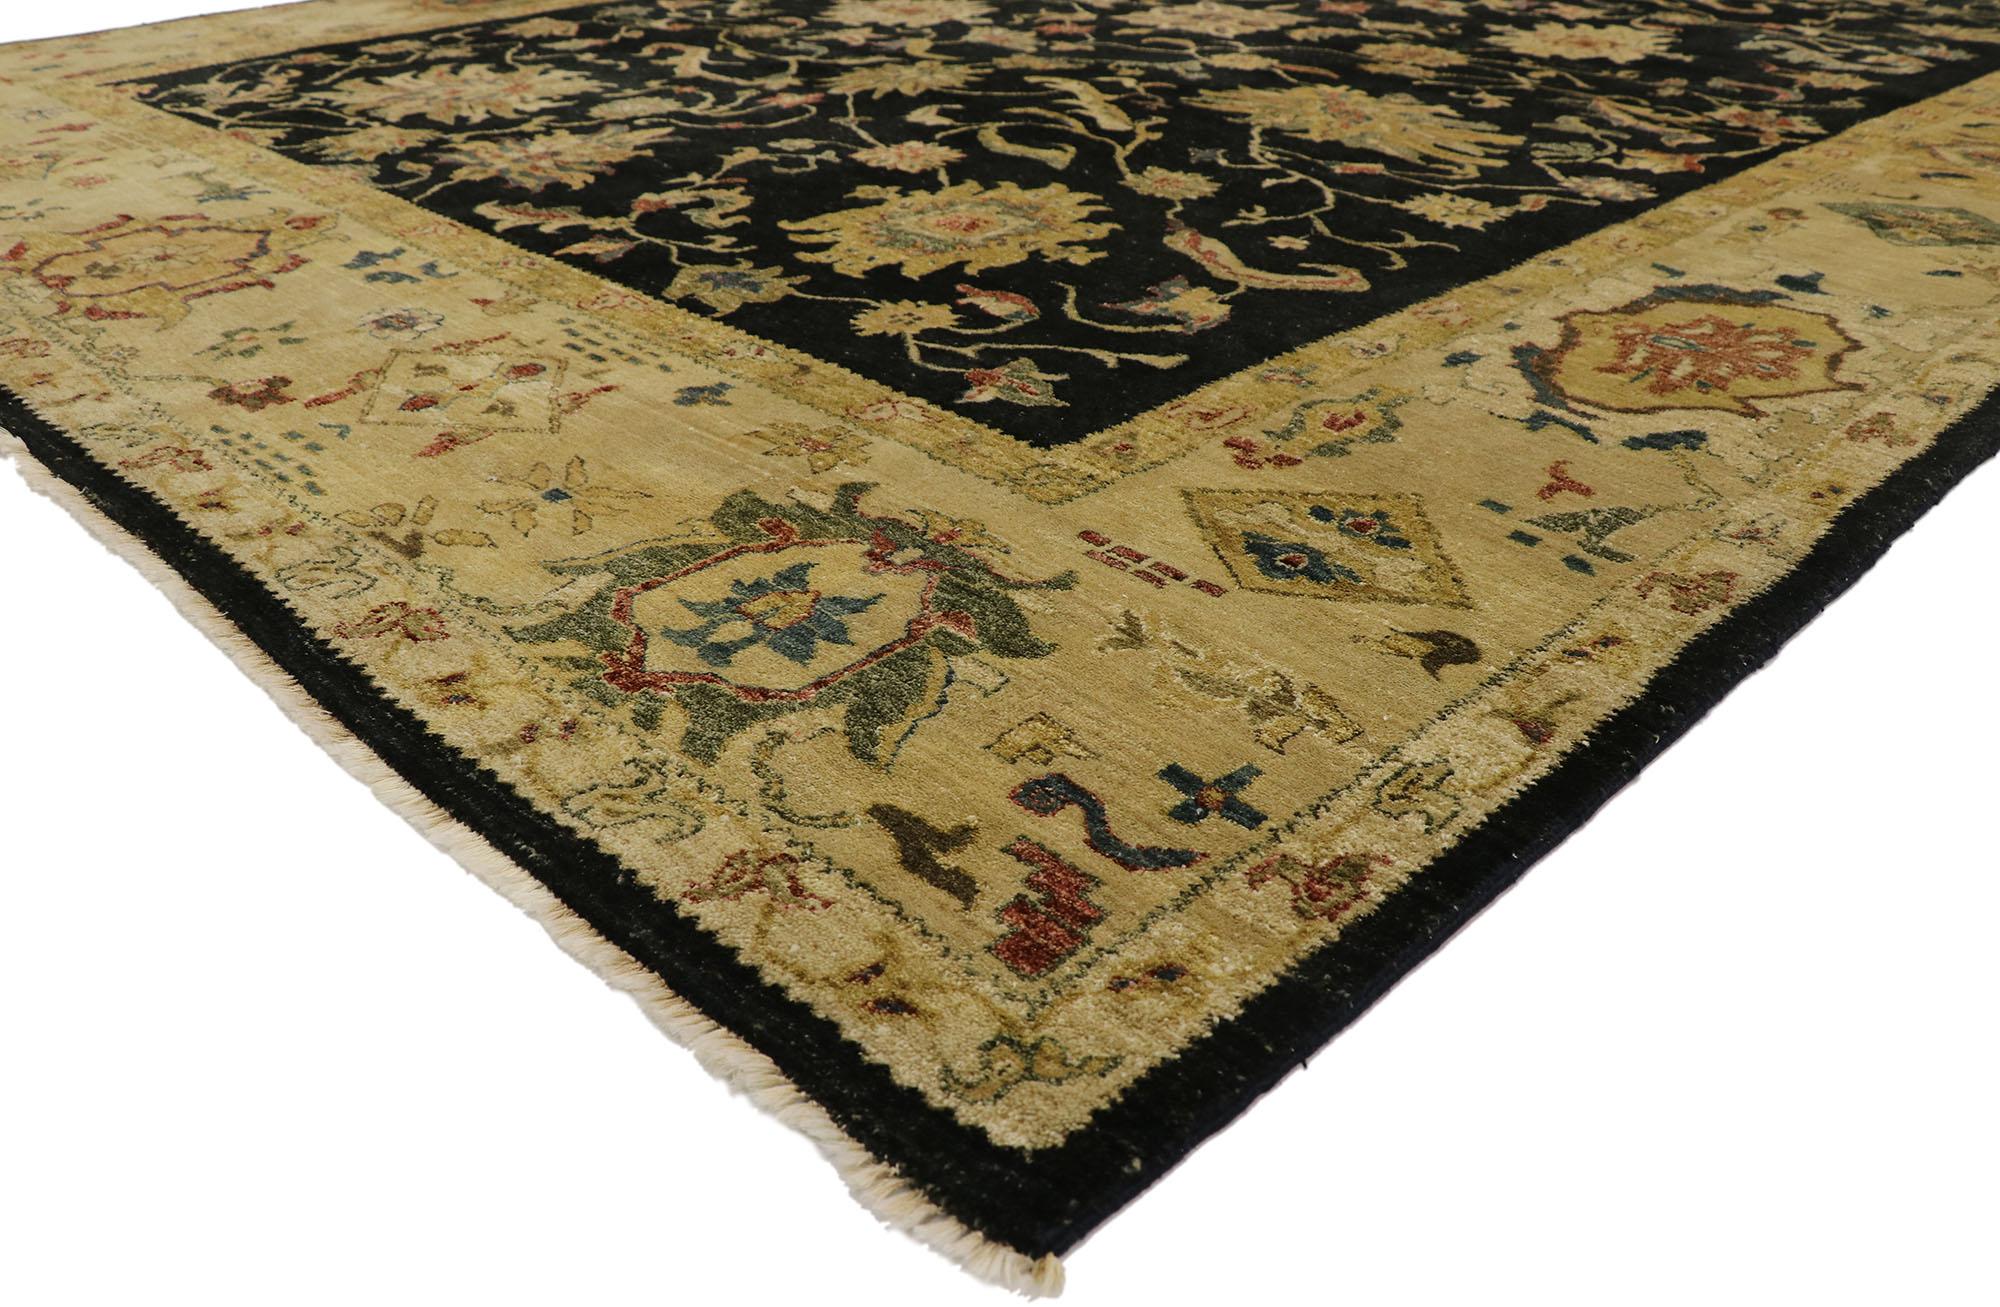 77413, vintage Pakistani Rug with Modern Amish Style 10'00 x 14'00. Balancing a timeless design and understated elegance, this vintage hand knotted wool Pakistani area rug beautifully embodies a Modern Amish style with Persian vibes. The abrashed